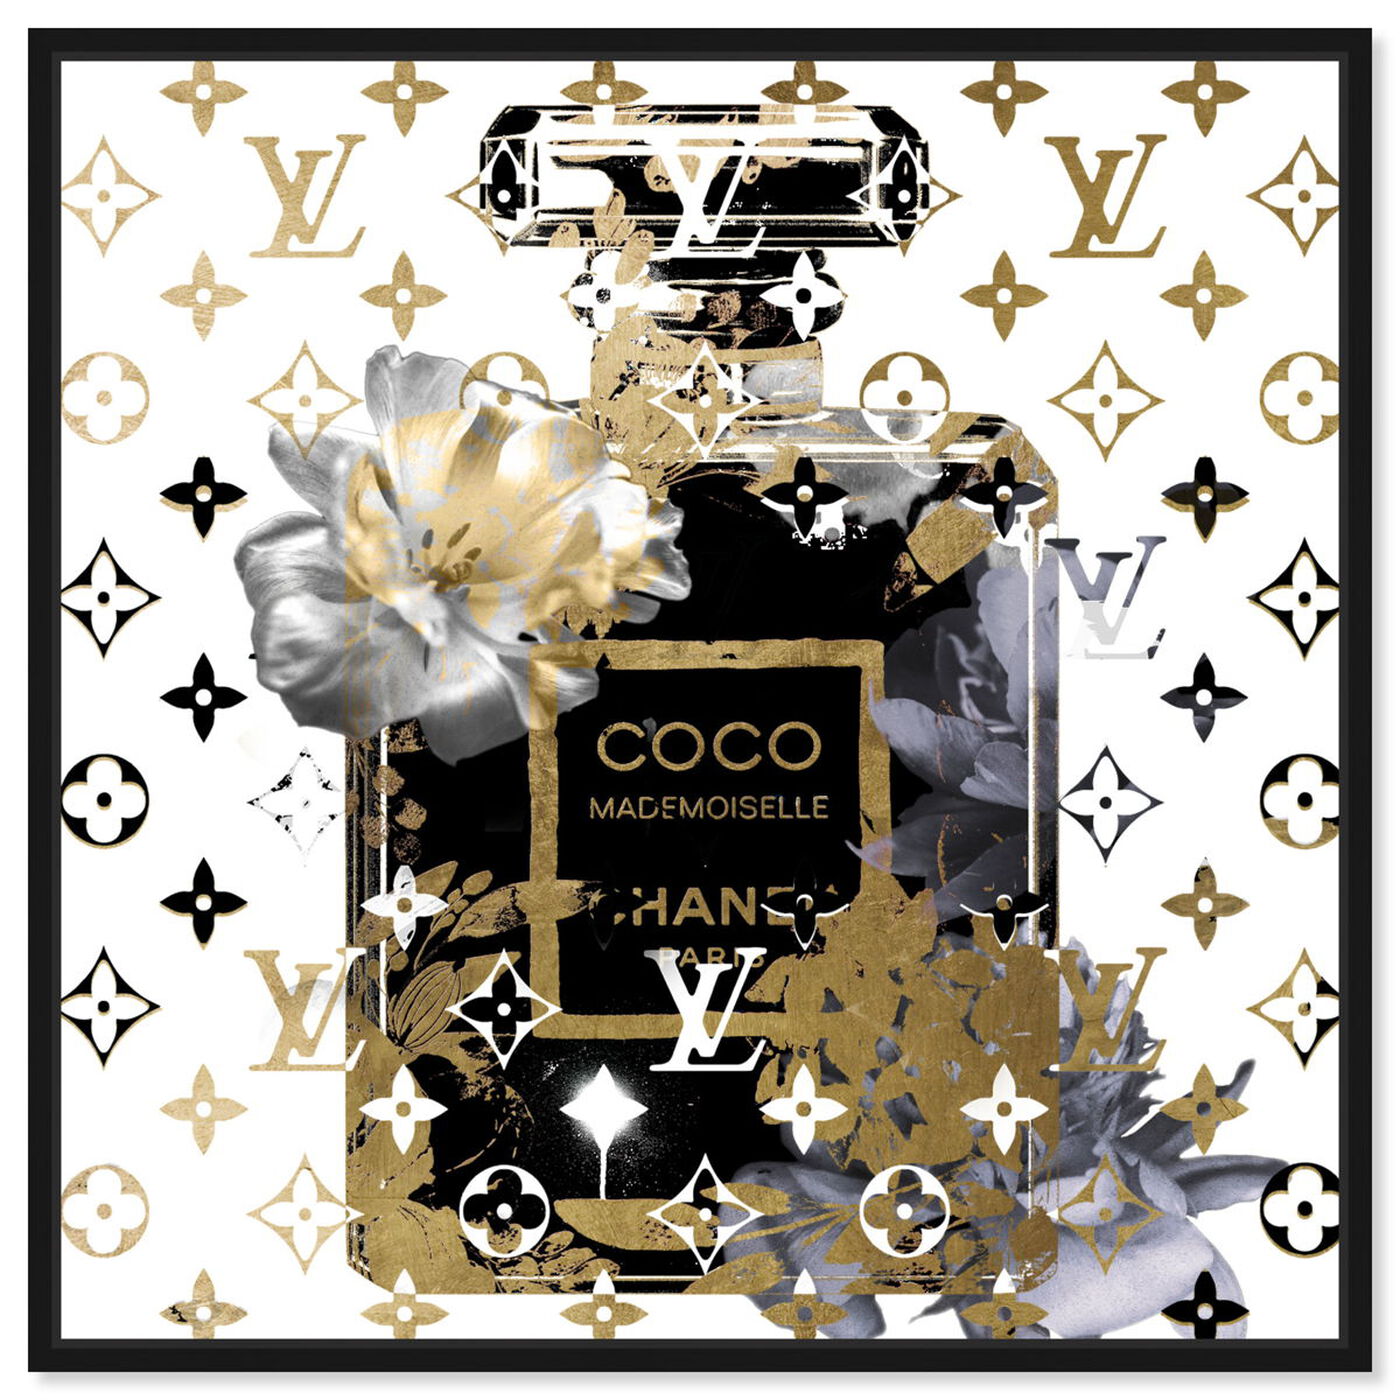 Coco Chanel Blue Perfume Bottle Art With White Frame